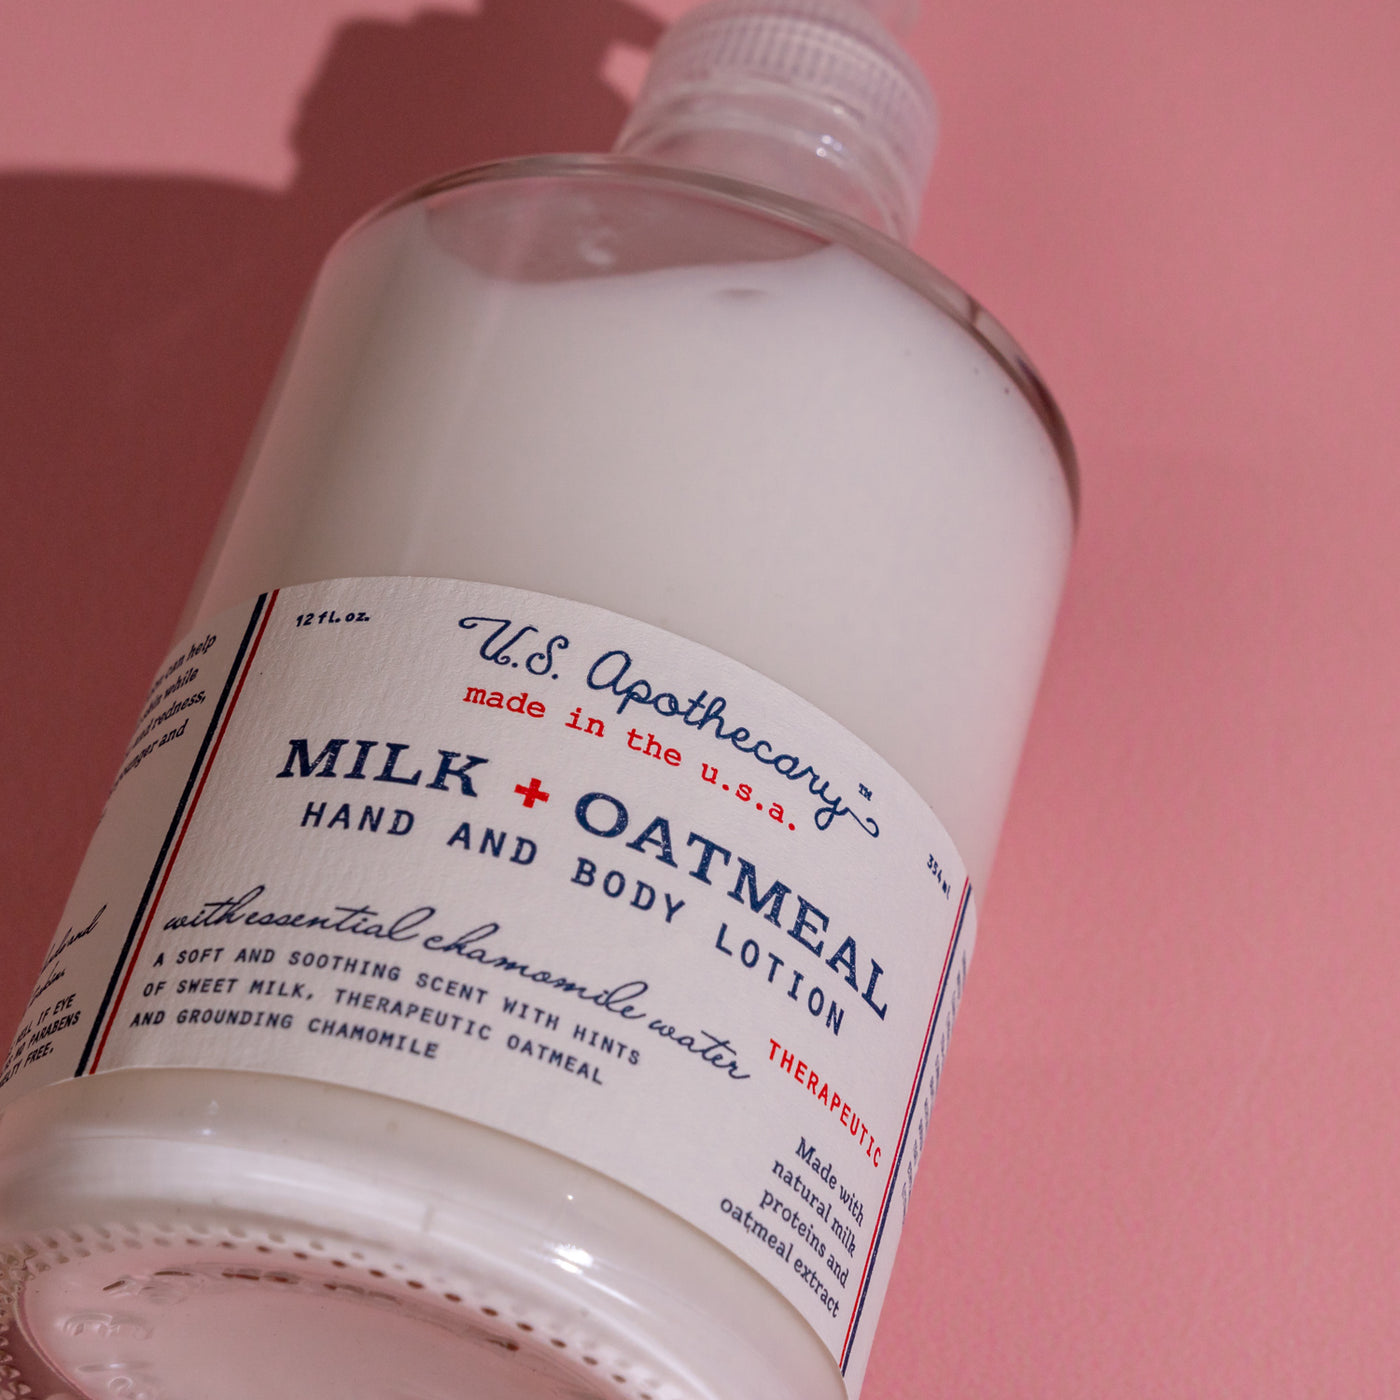 US Apothecary Milk + Oatmeal Hand and Body Lotion